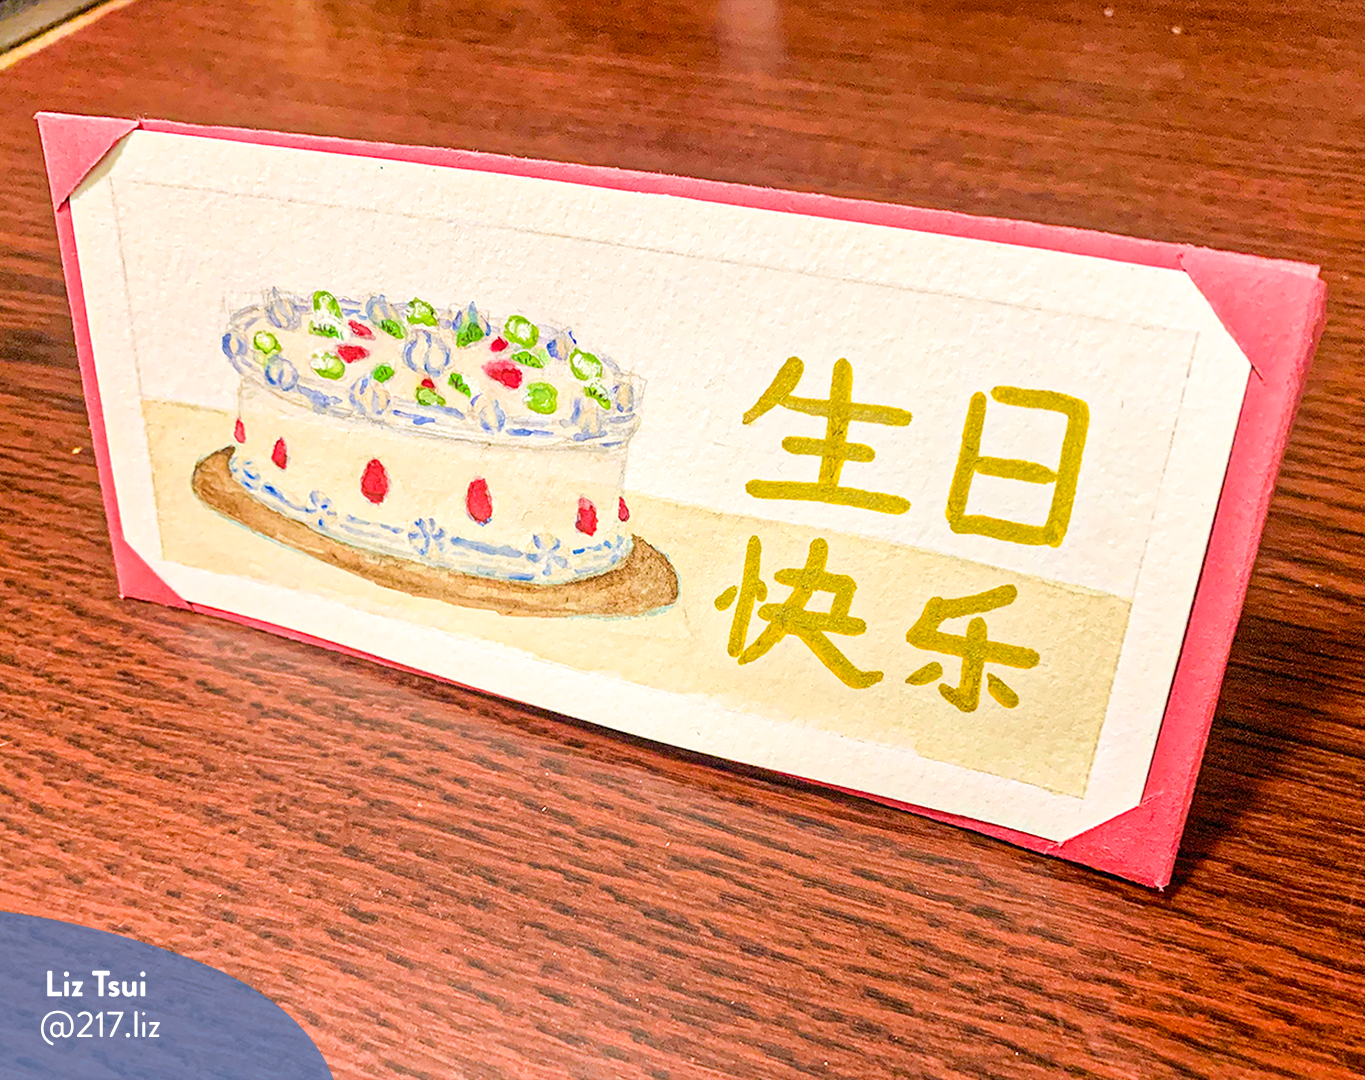 Horizontal photo of a card illustration by Liz Tsui, showcases a Chinese fruit cake on a table with Chinese characters. The card is standing up on a redwood table. The photo has a watermark with Liz’ name and Instagram handle (@217.liz).